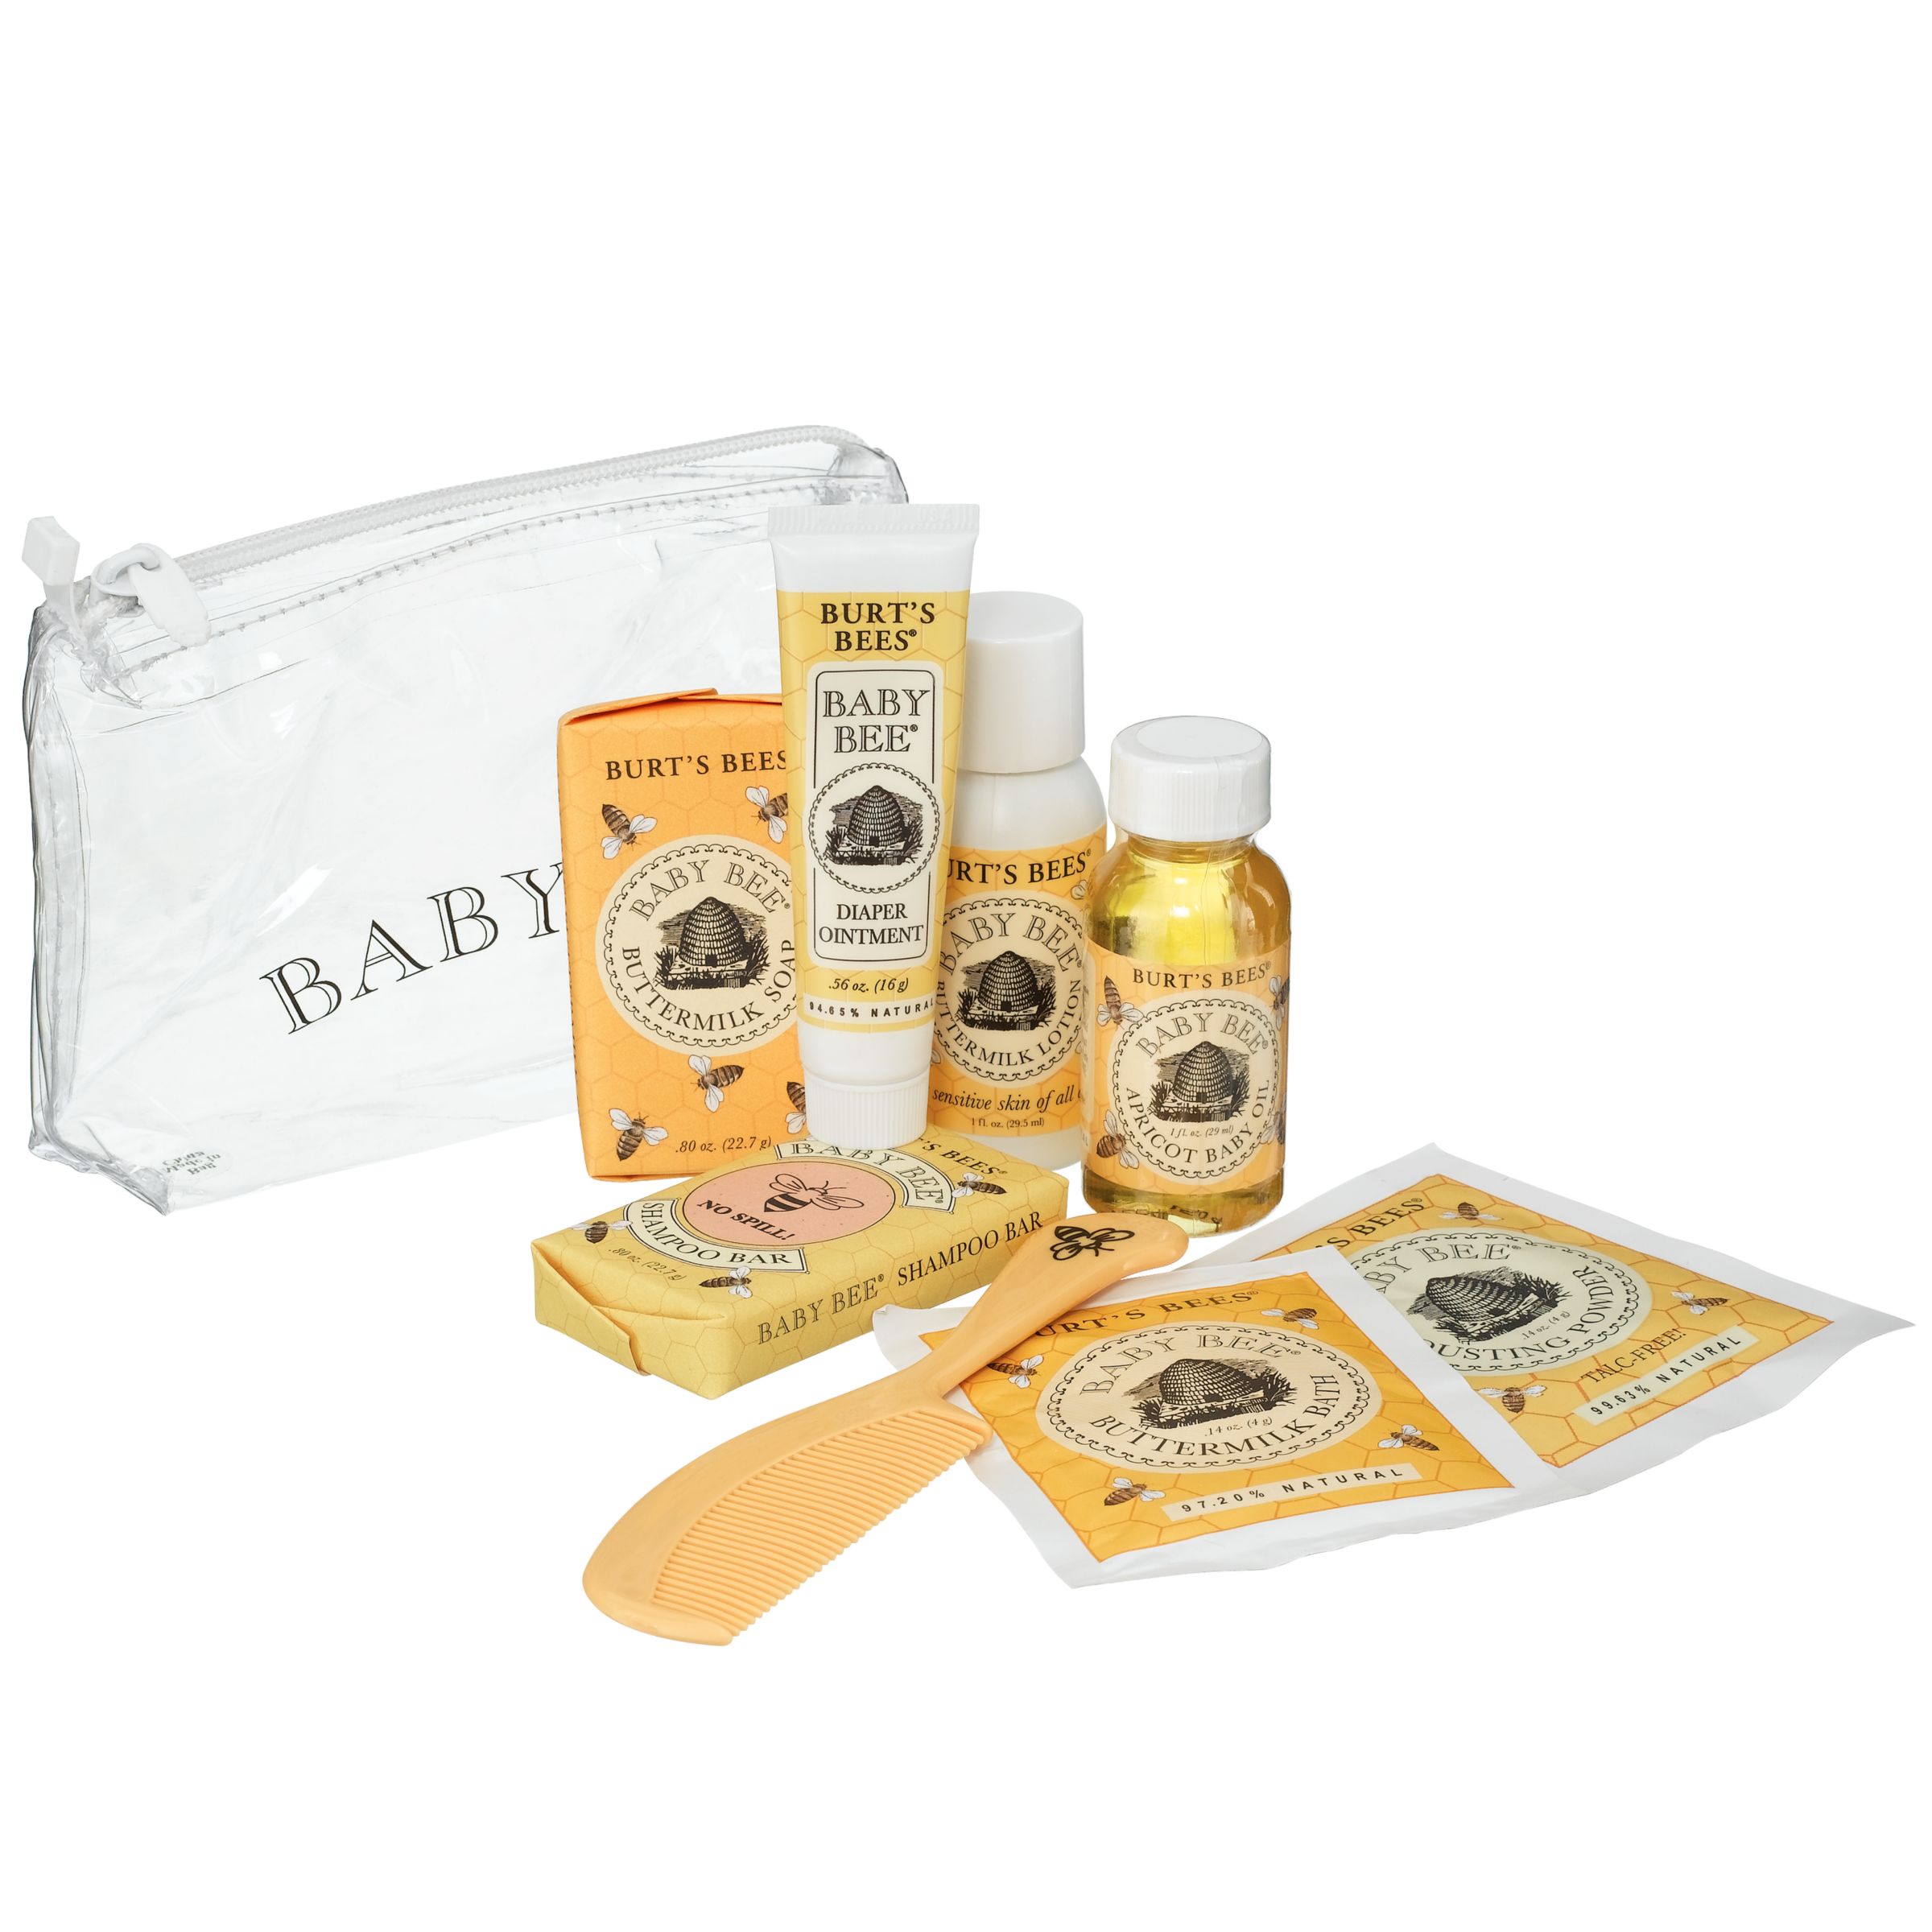 Burtand#39;s Bees Baby Bee Getting Started Kit